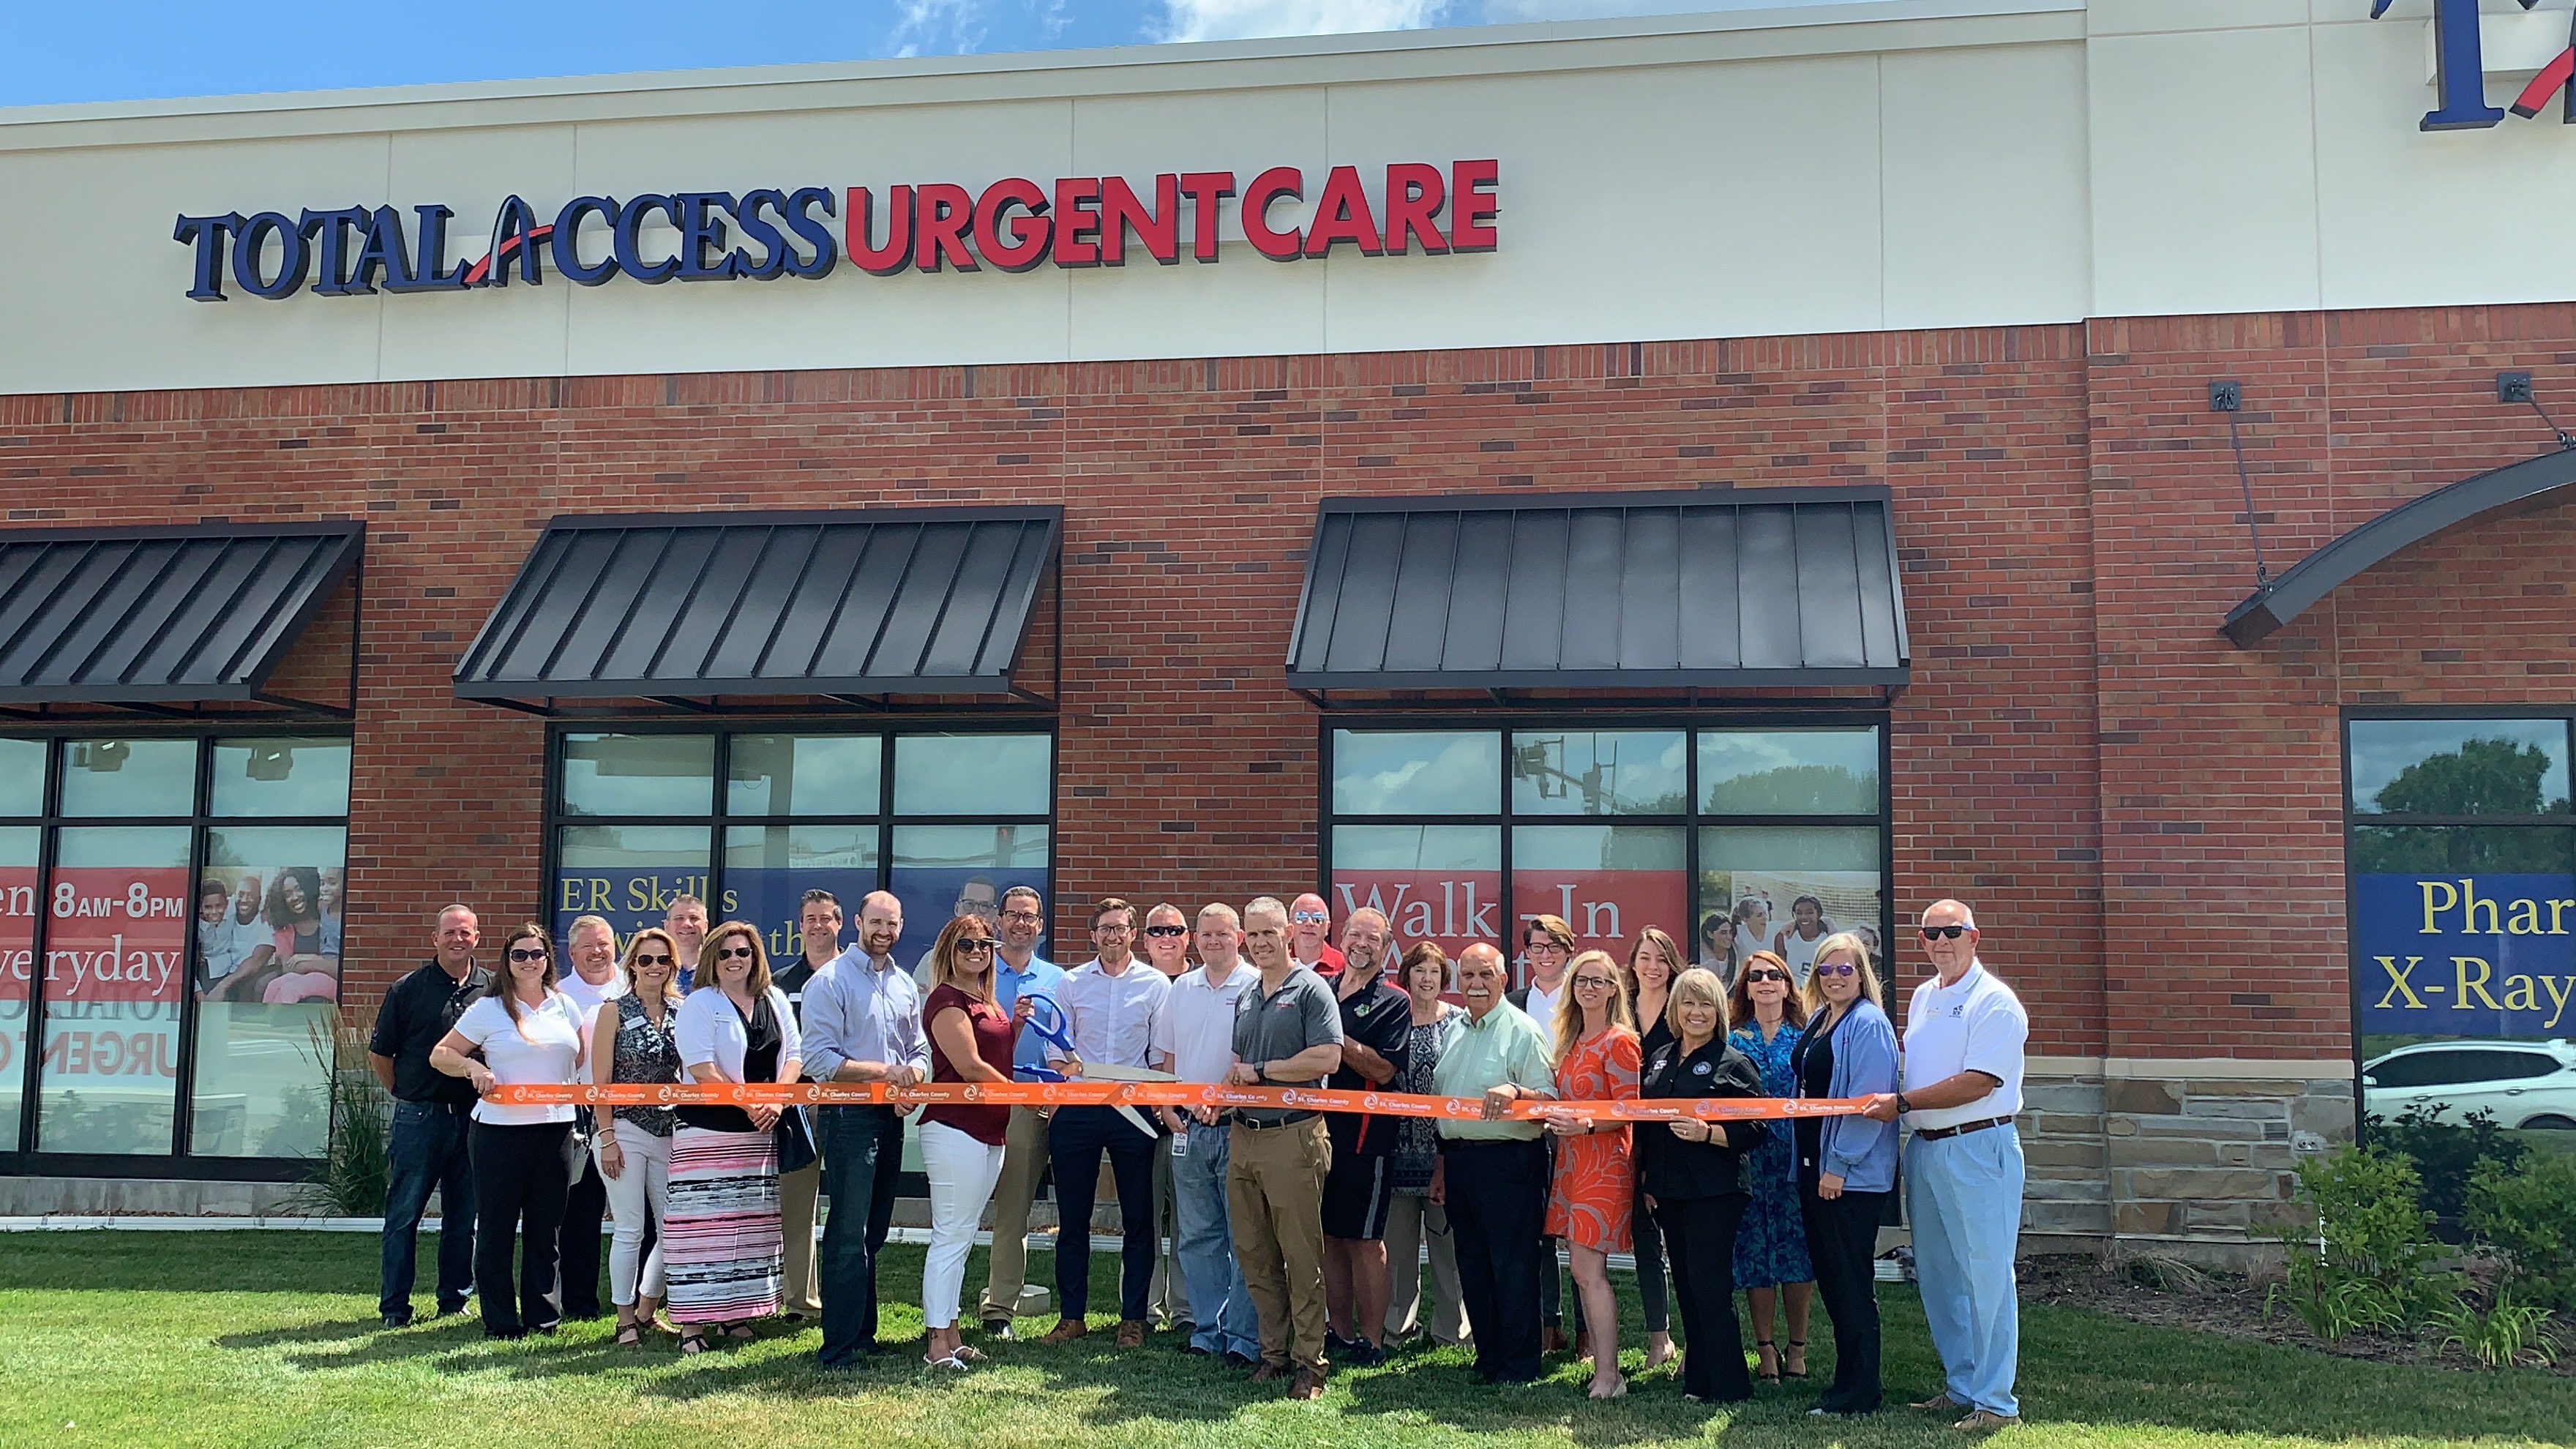 Total Access Urgent Care Celebrates Their Grand Opening in St. Peters with Ribbon Cutting